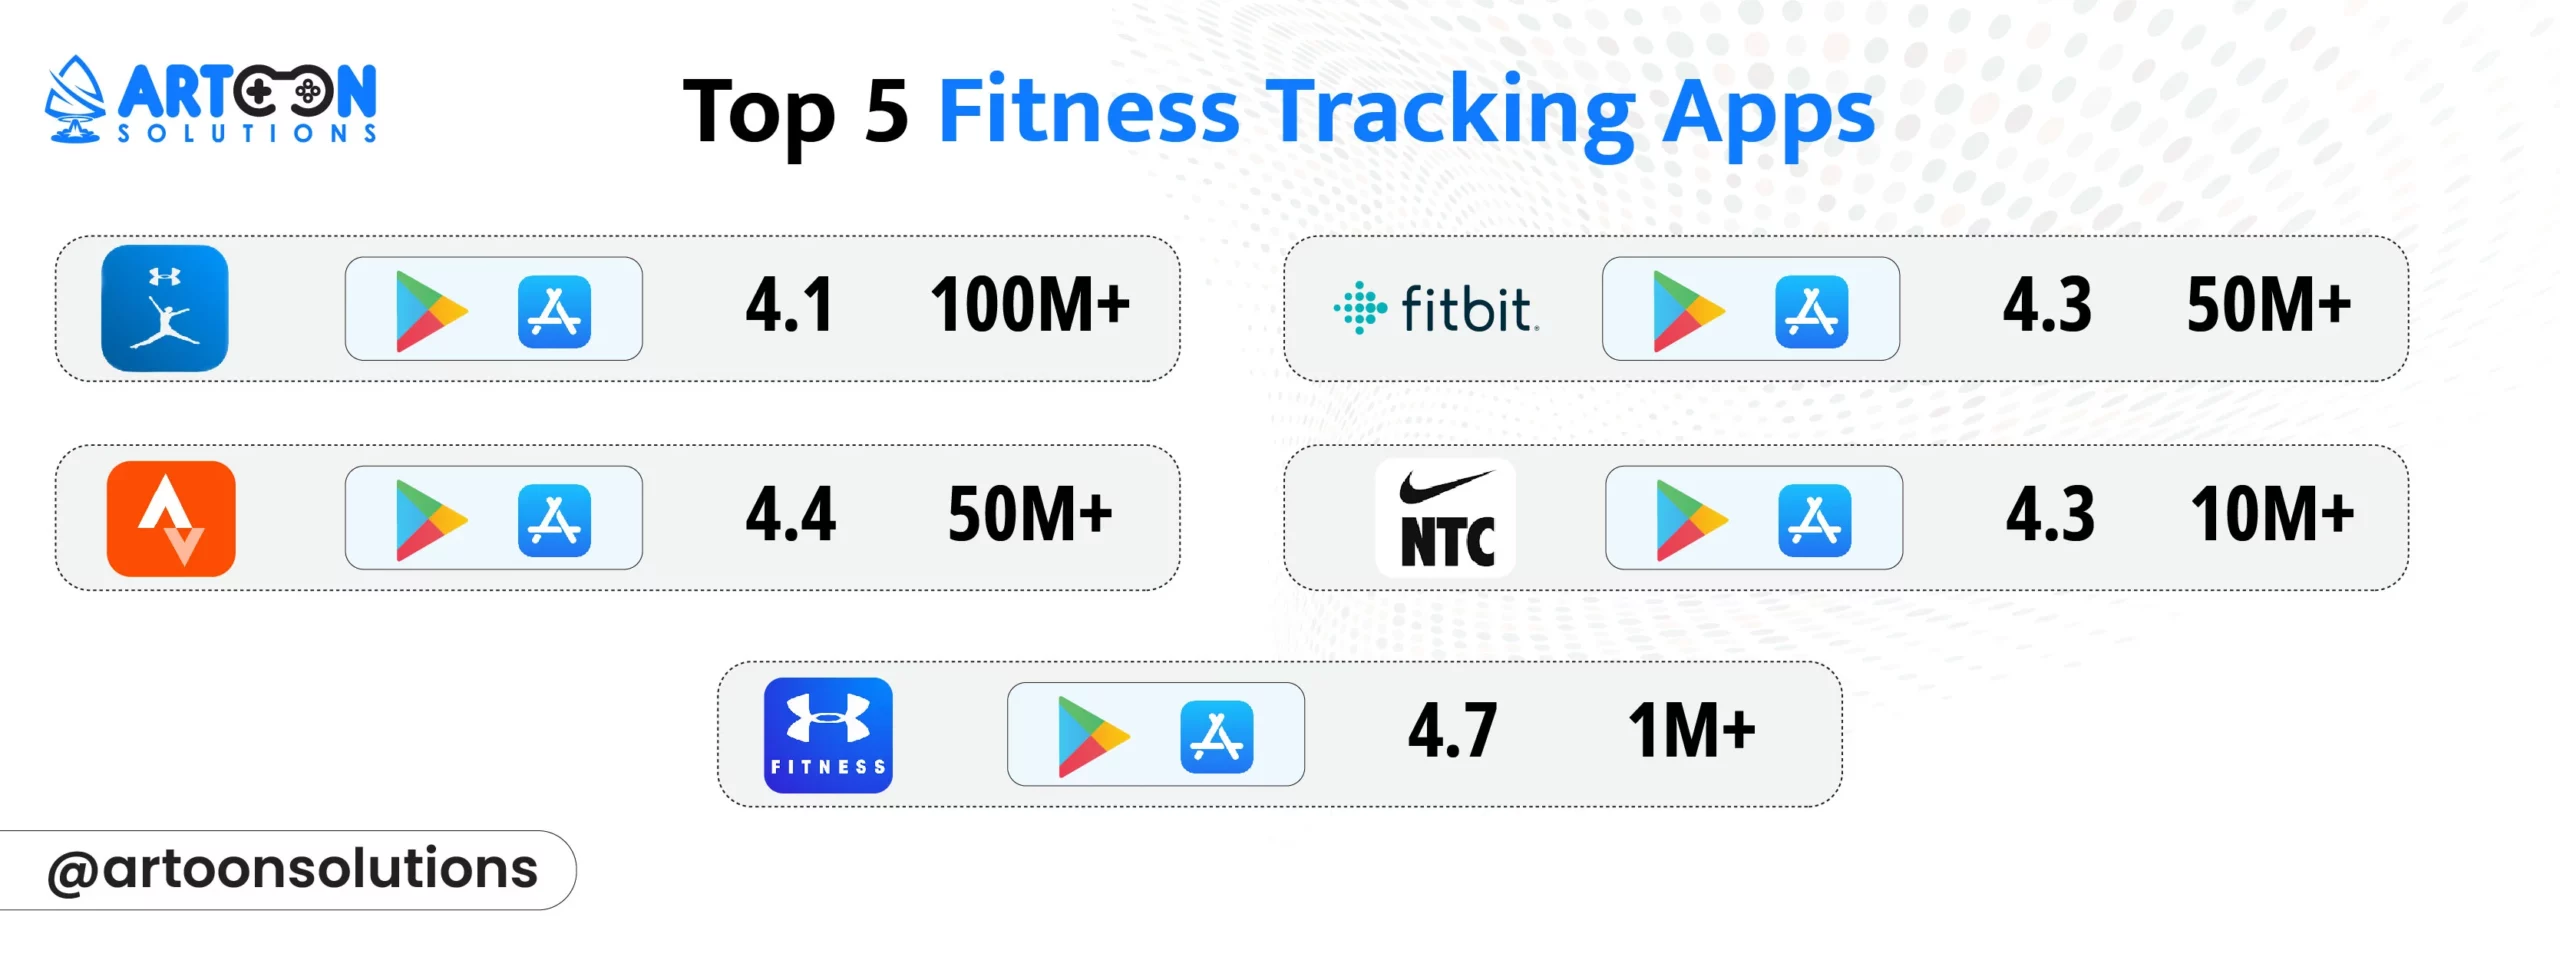 Fitness Tracking Apps like Google Fit